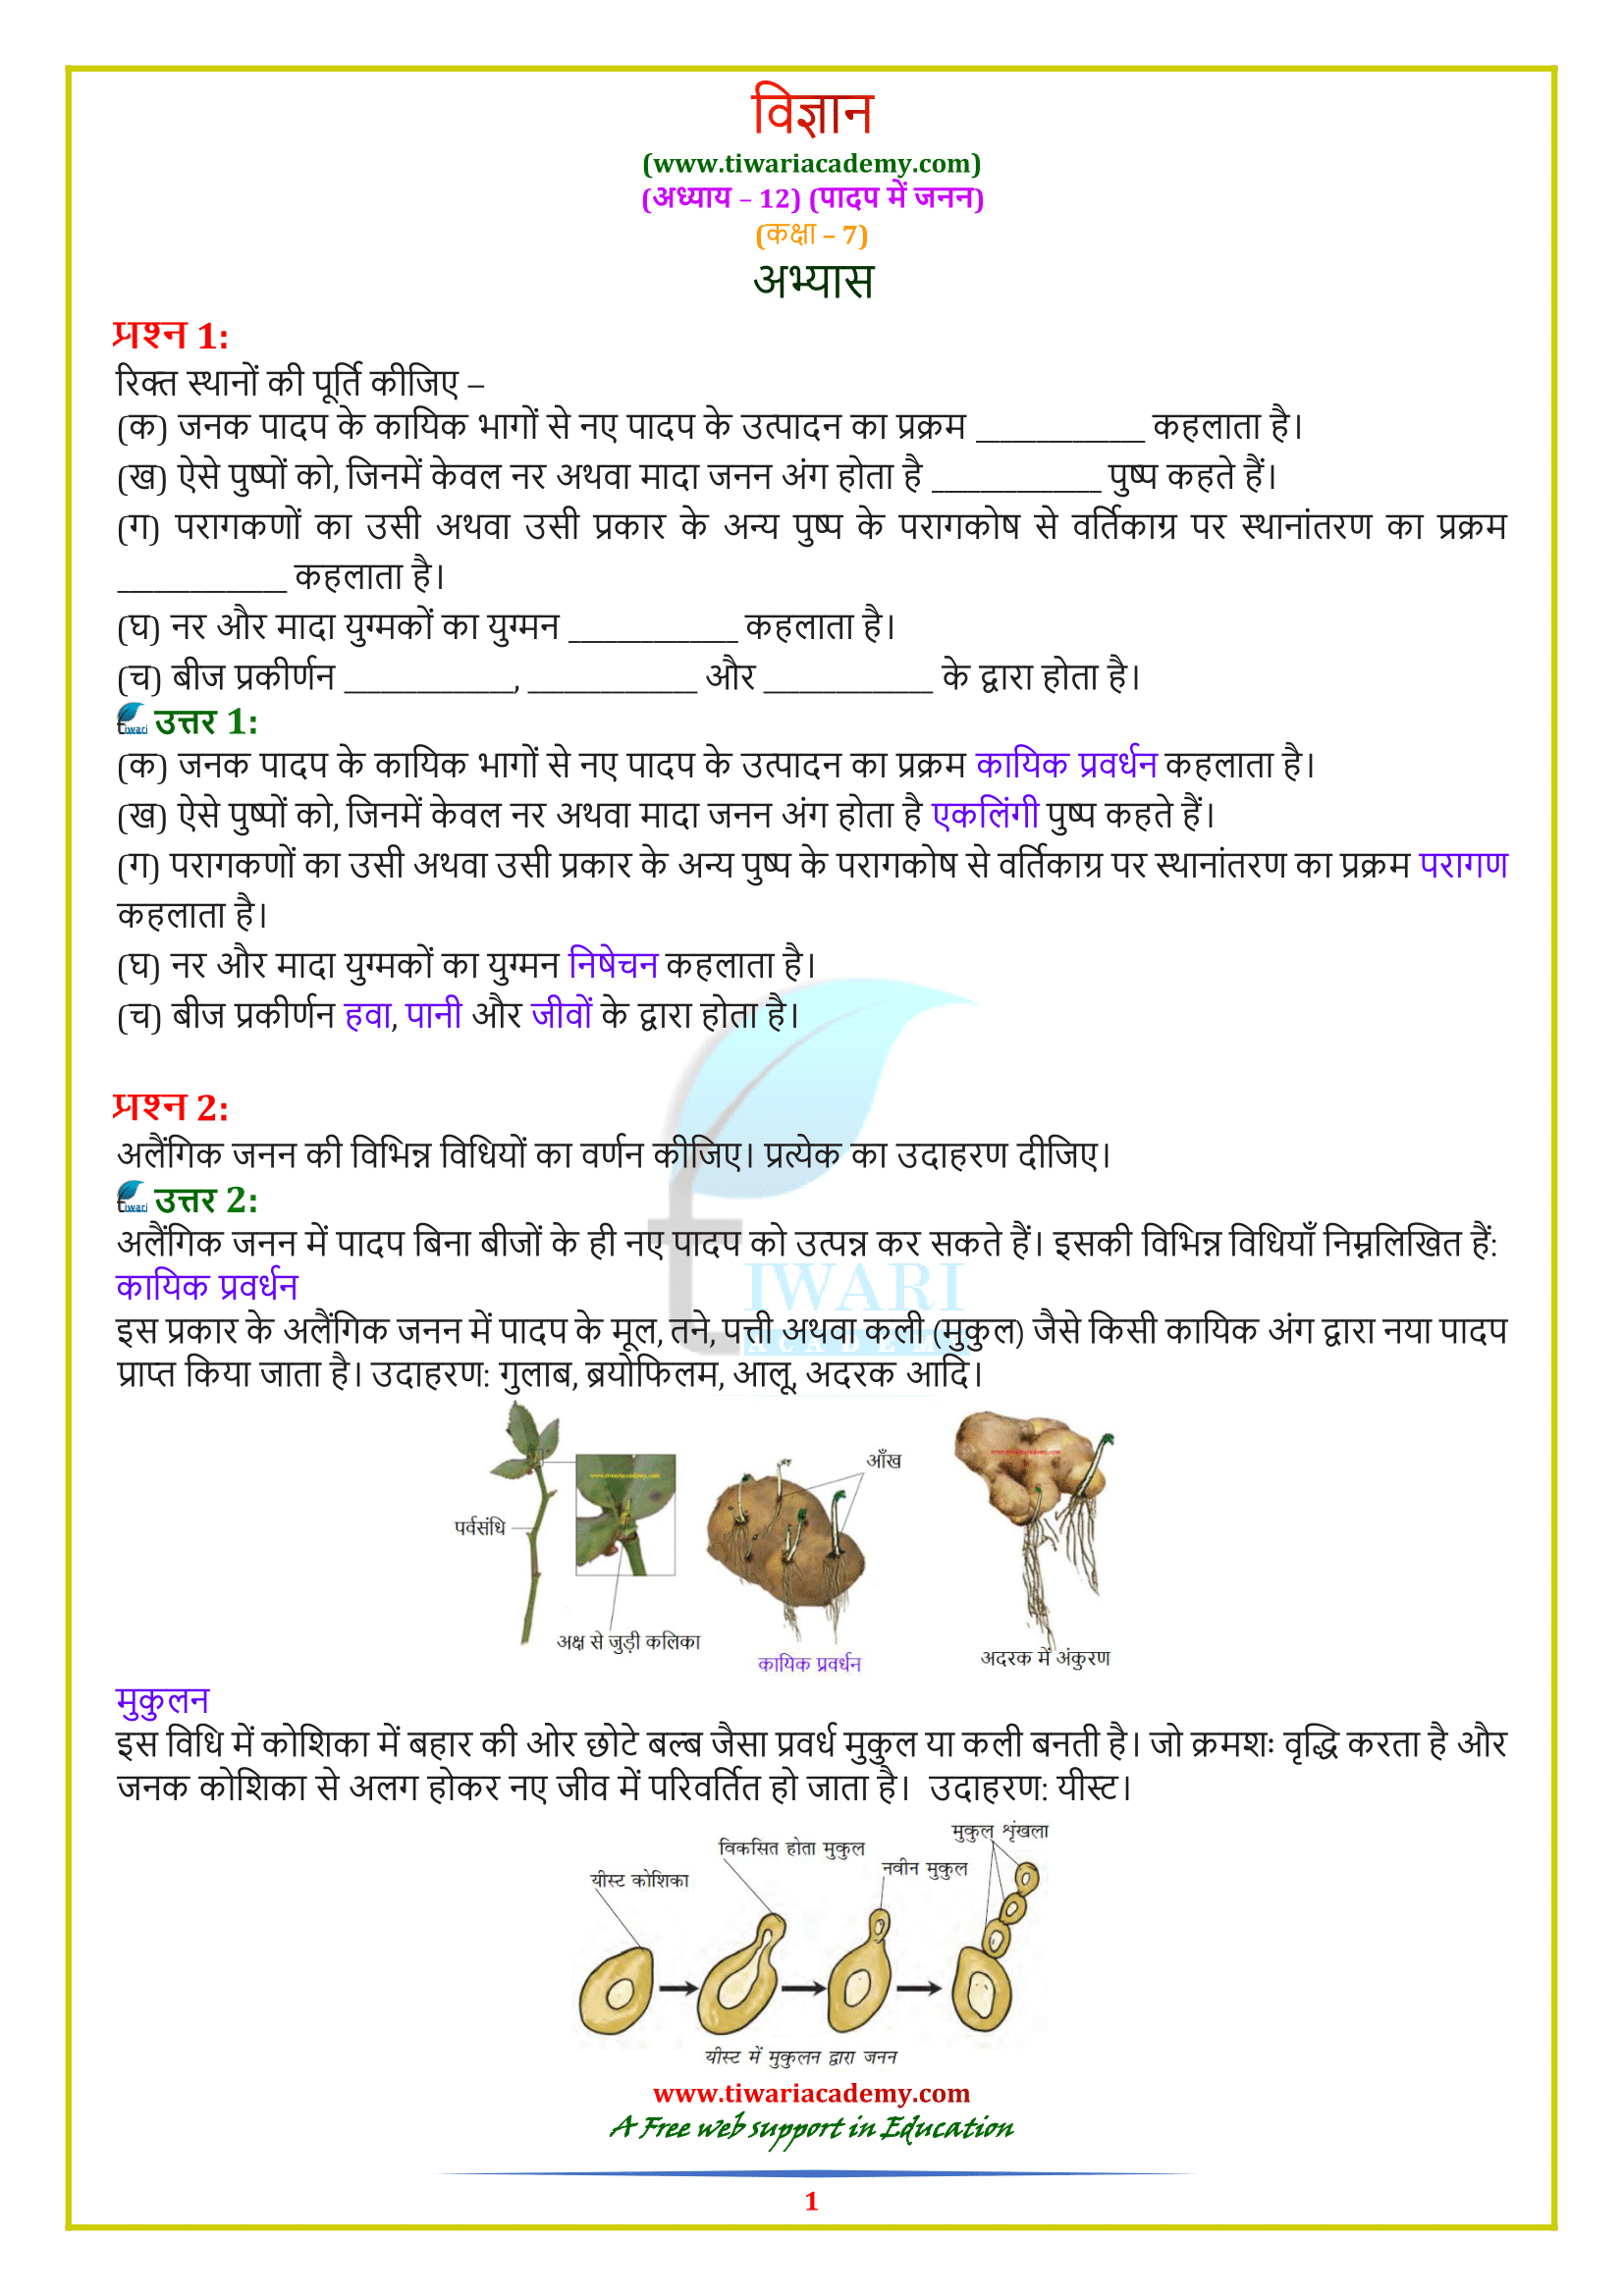 NCERT Solutions for Class 7 Science chapter 12